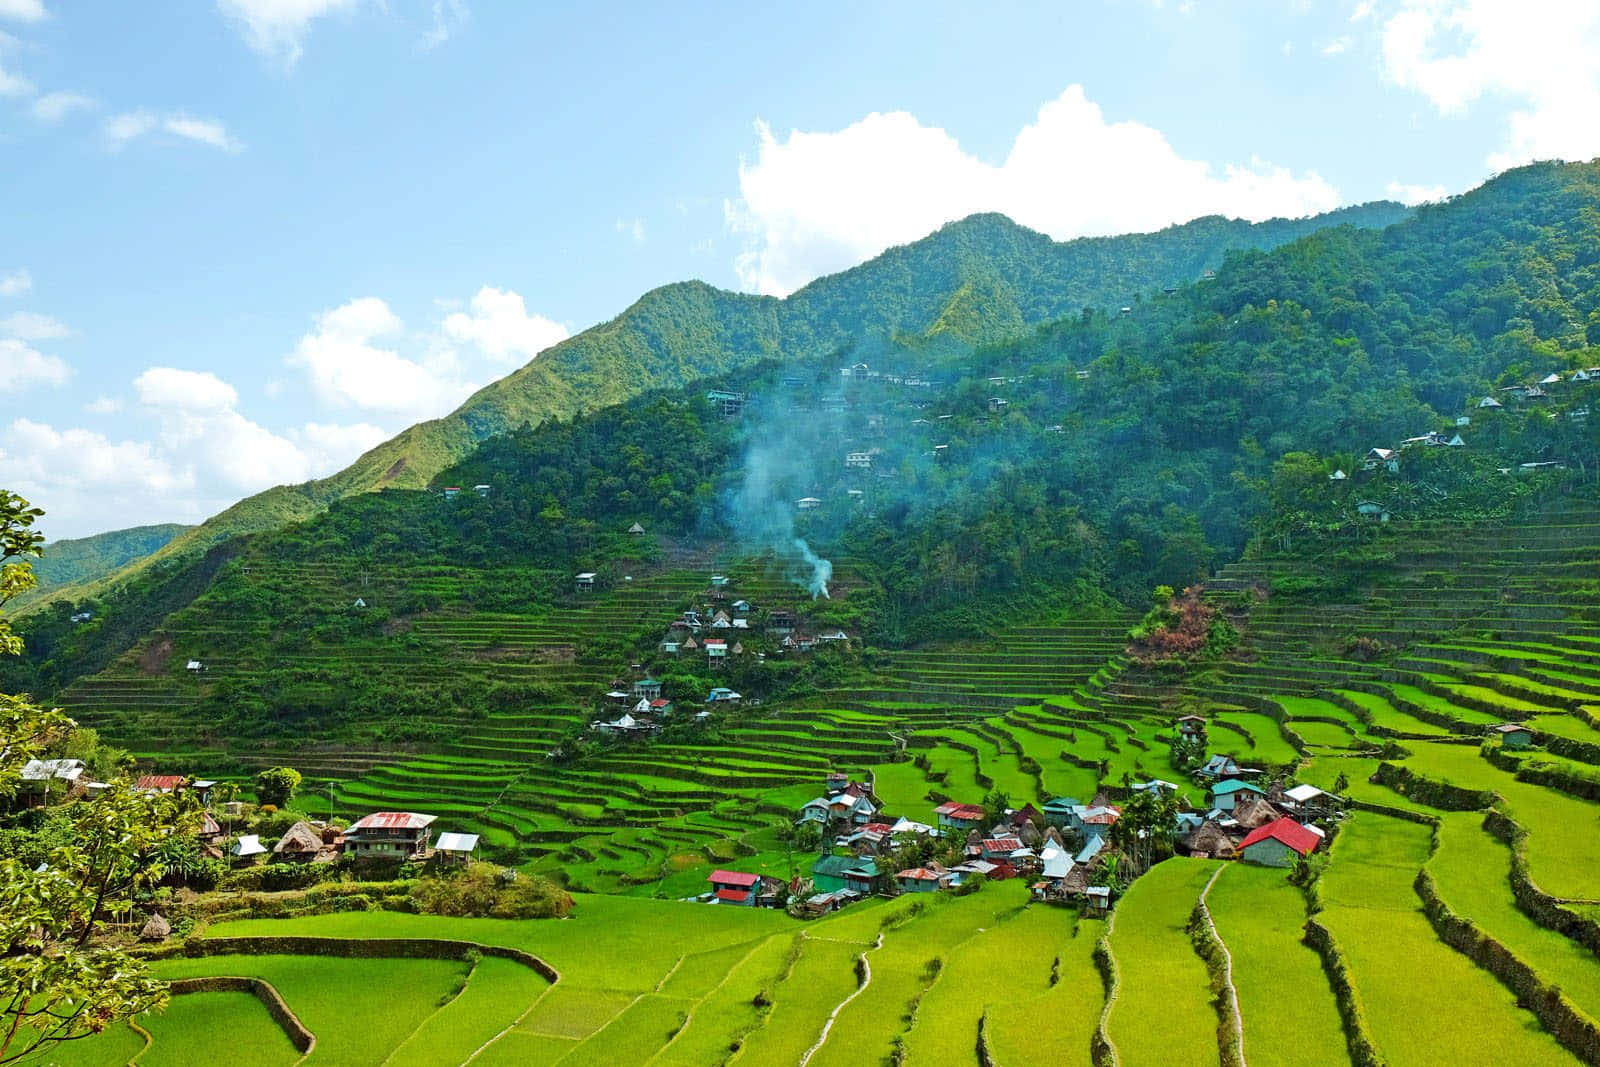 Banaue Rice Terraces In The Philippines With Smoke Wallpaper